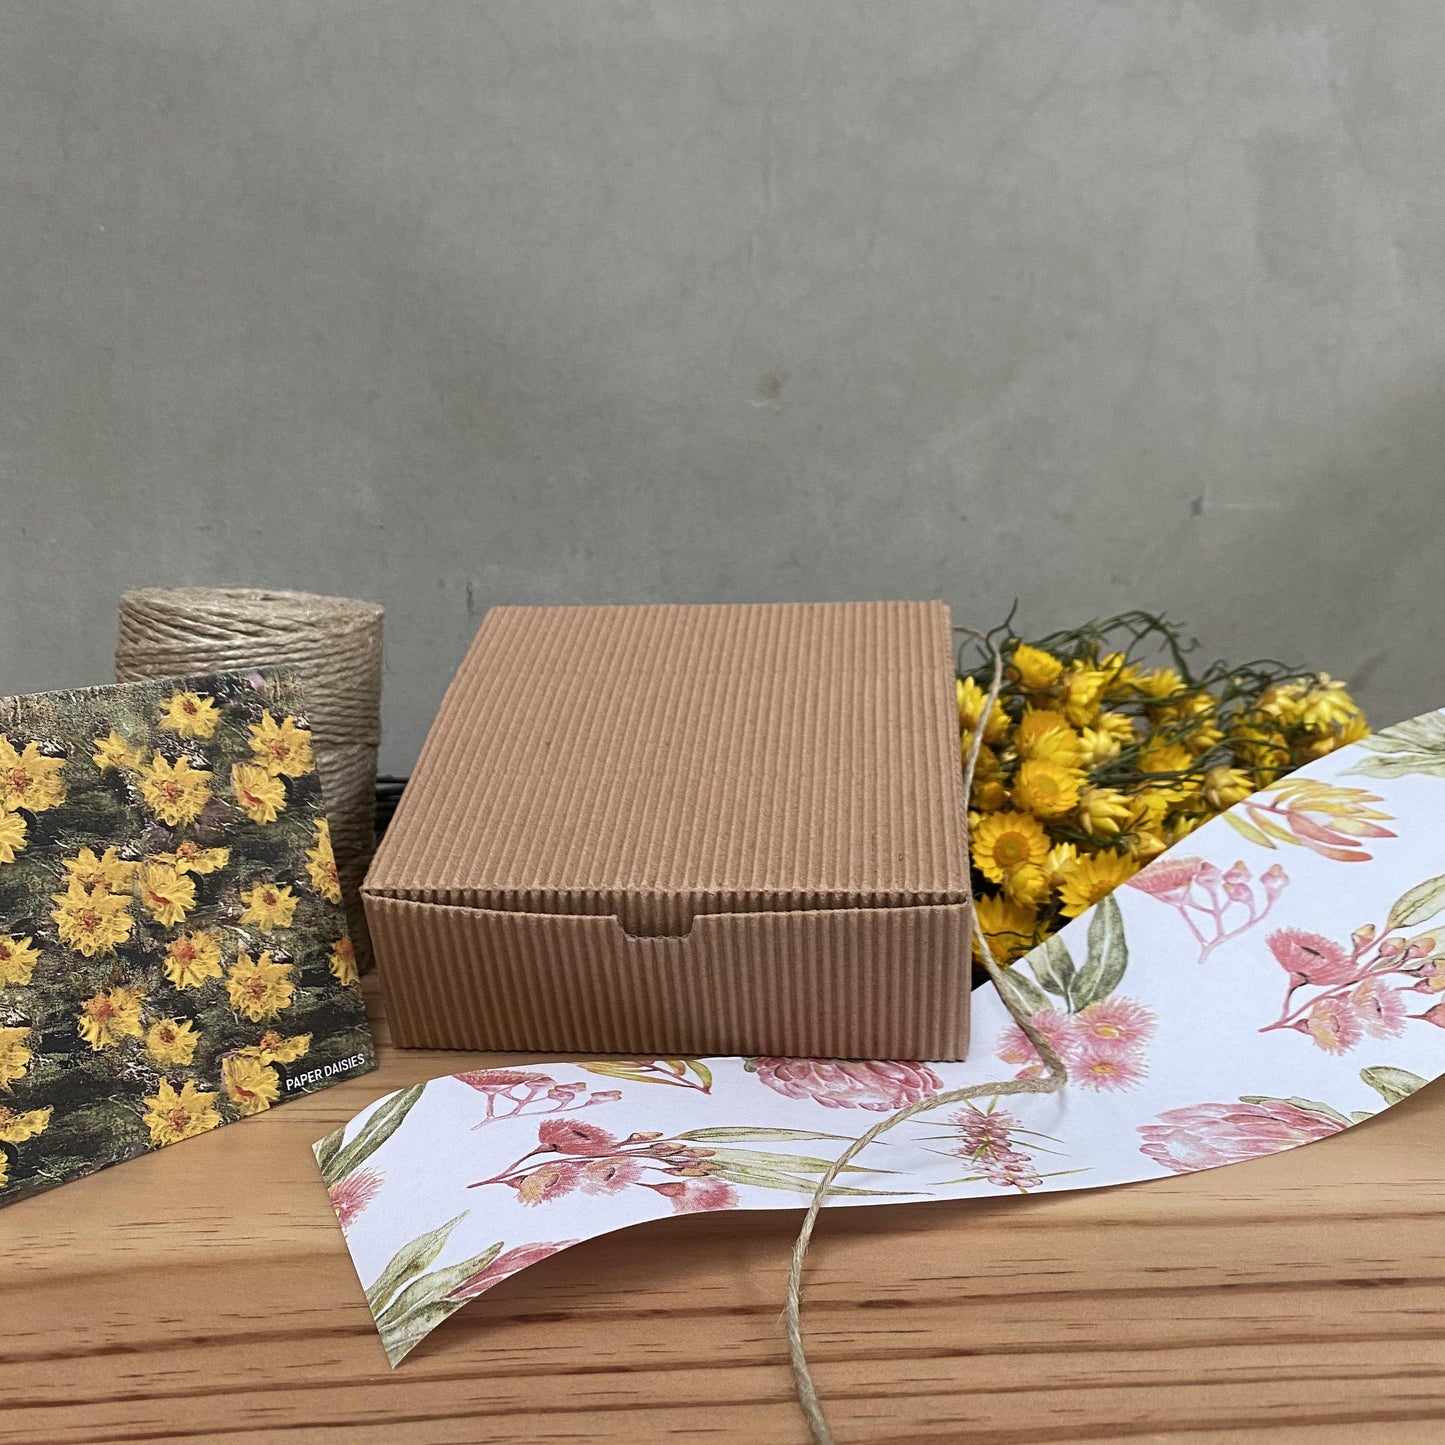 Gift Wrapping - UrthlyOrganics Natural ethical skincare and cleaning